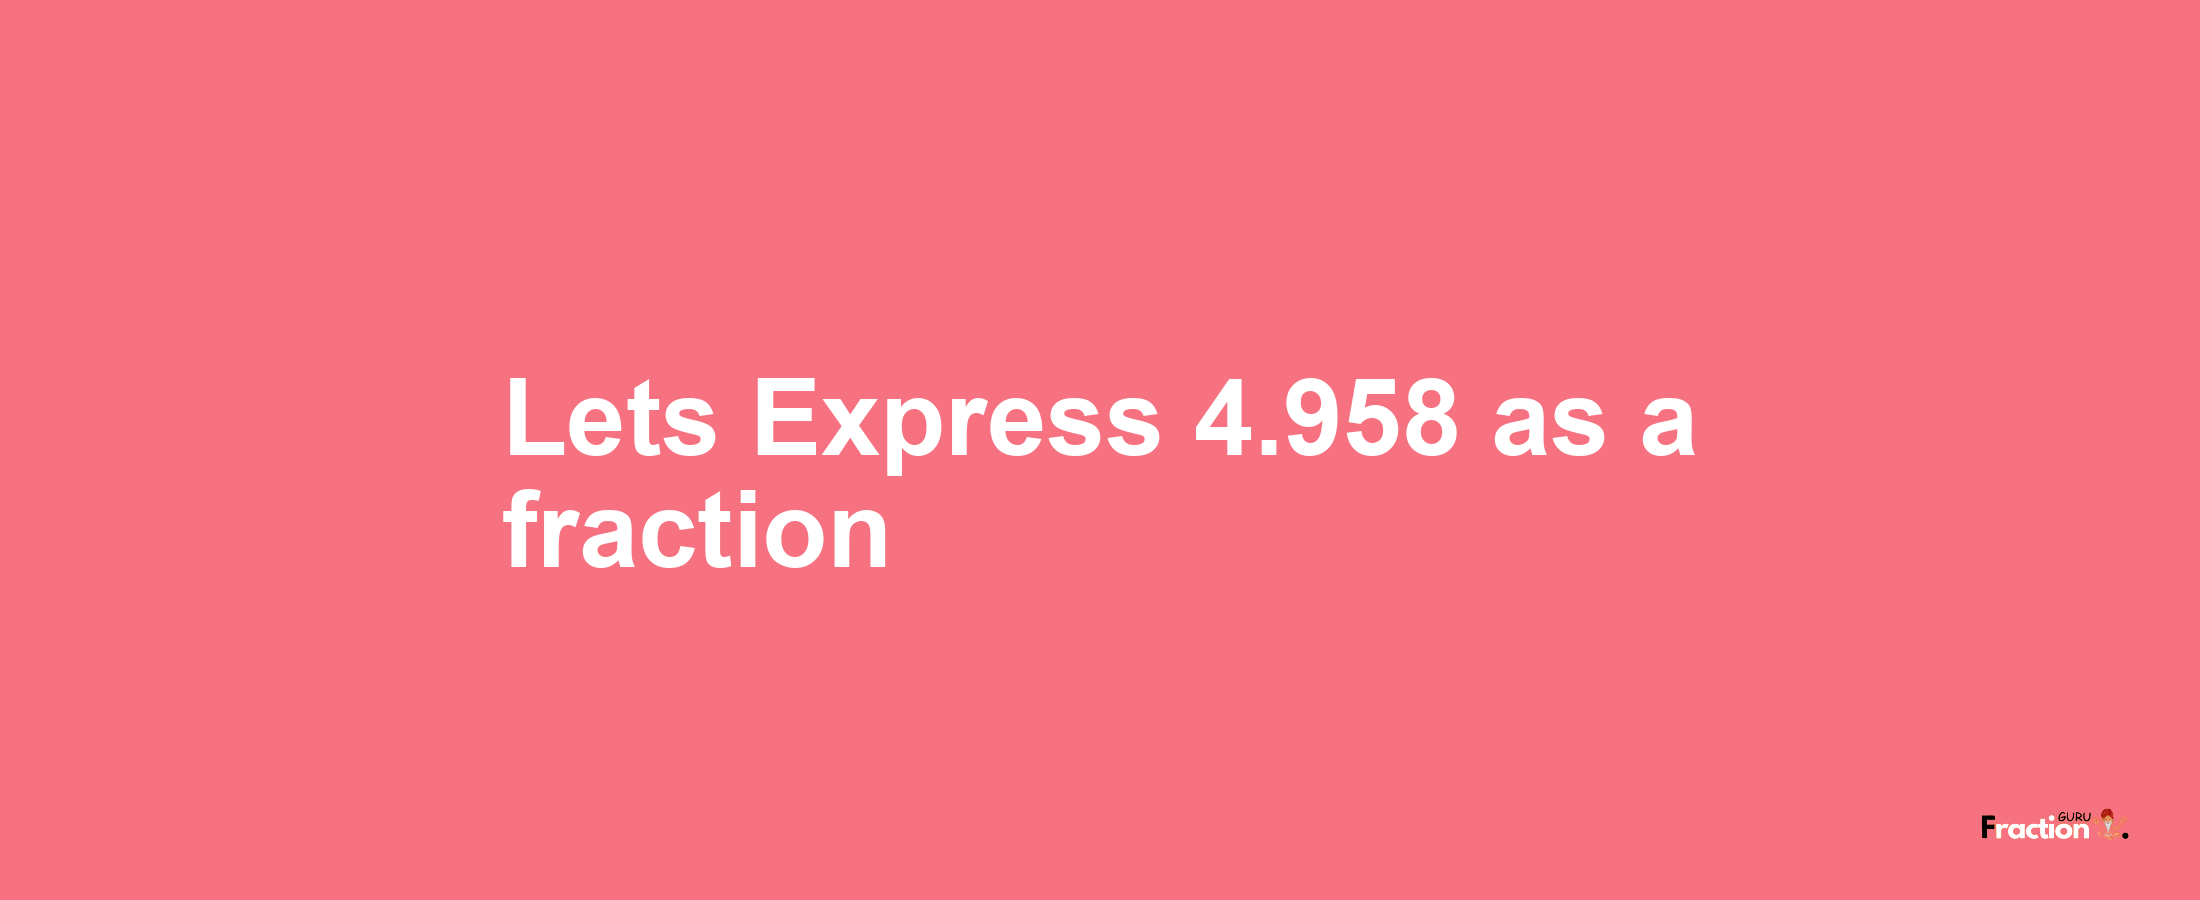 Lets Express 4.958 as afraction